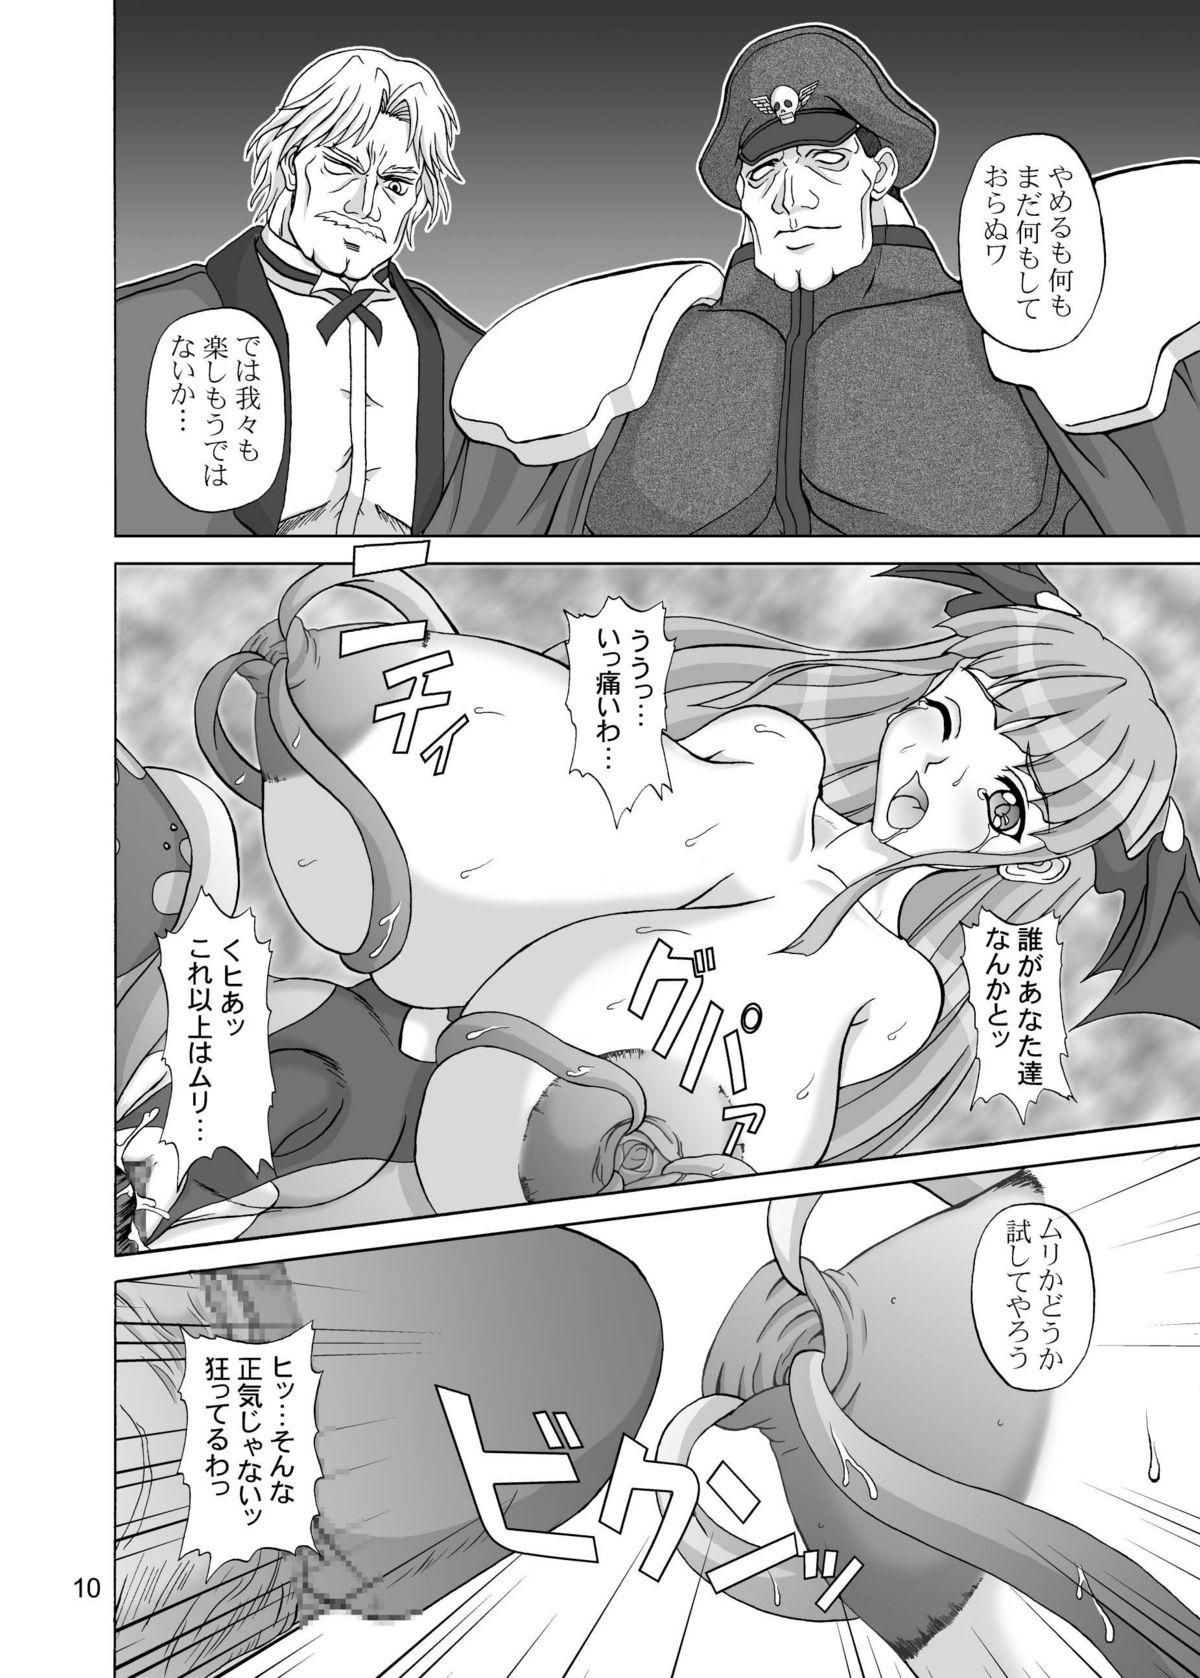 Spandex Insanity 2 - King of fighters Darkstalkers Prostituta - Page 9